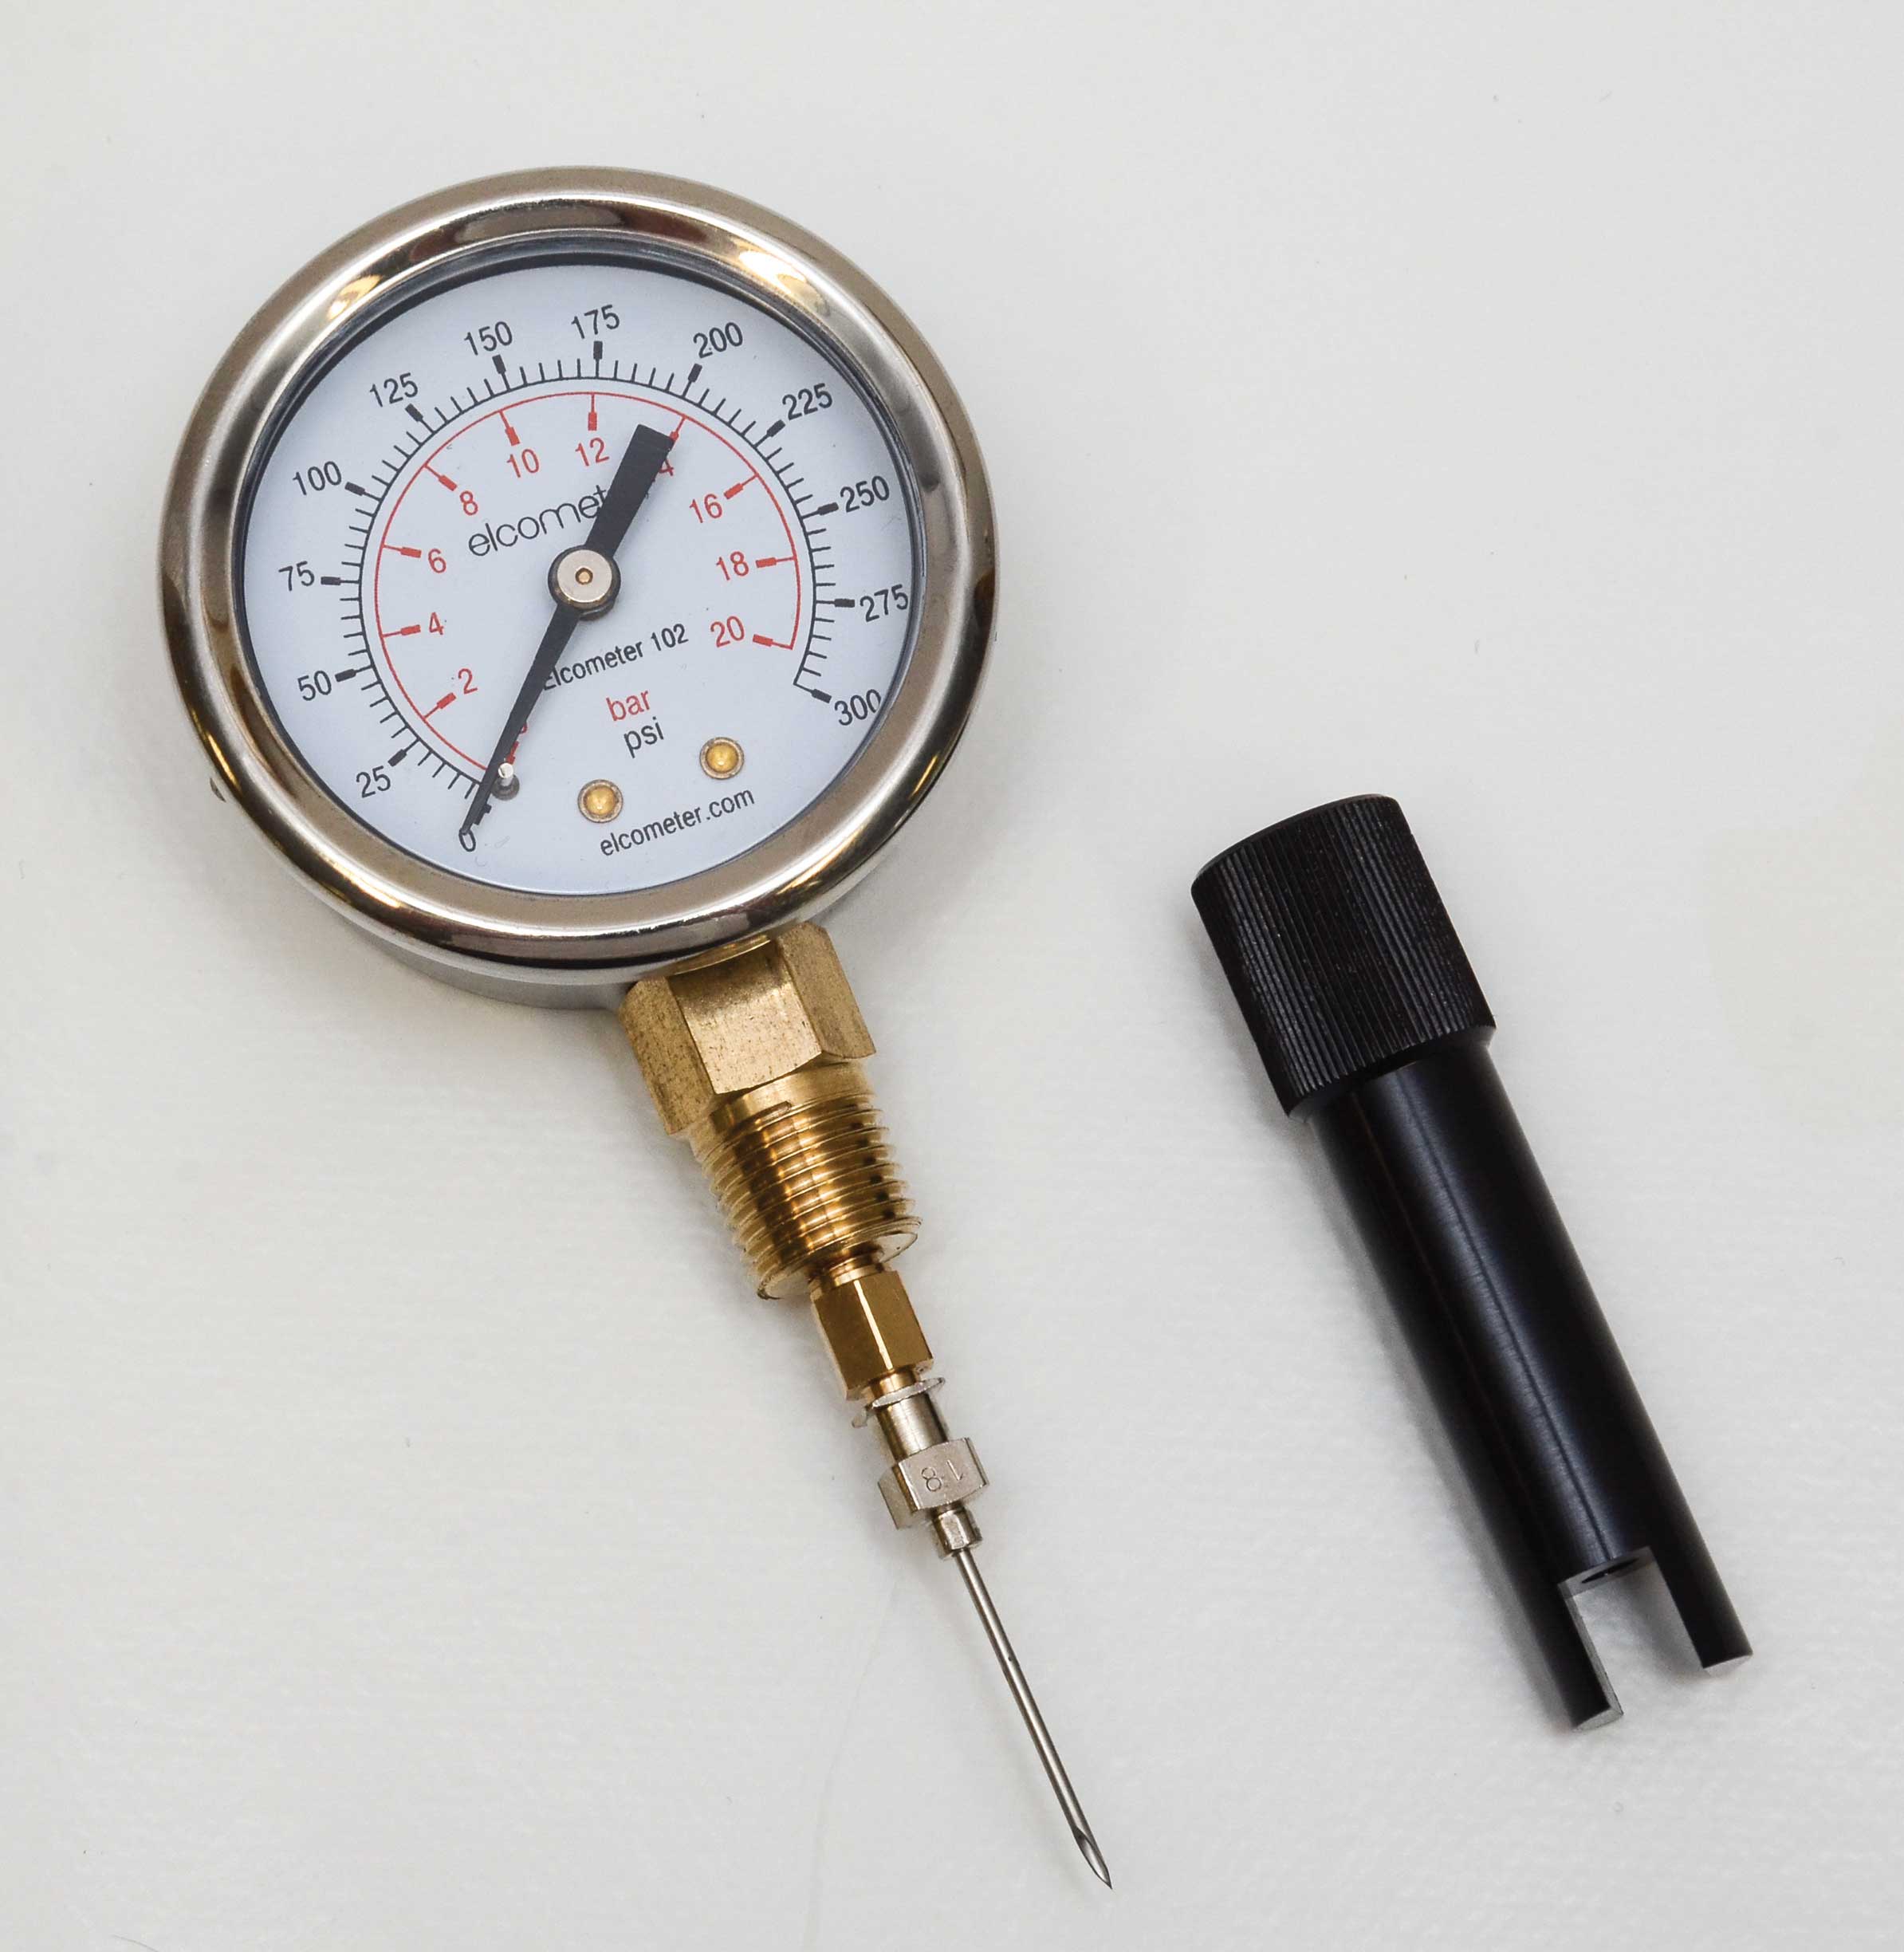 A golden pressure gauge that has a circular meter face which ranges from 0 to 300. The black arrow is currently pointing towards 0 psi and 0 bar. The meter is lay on its back with a black nozzle lay to the right of it.